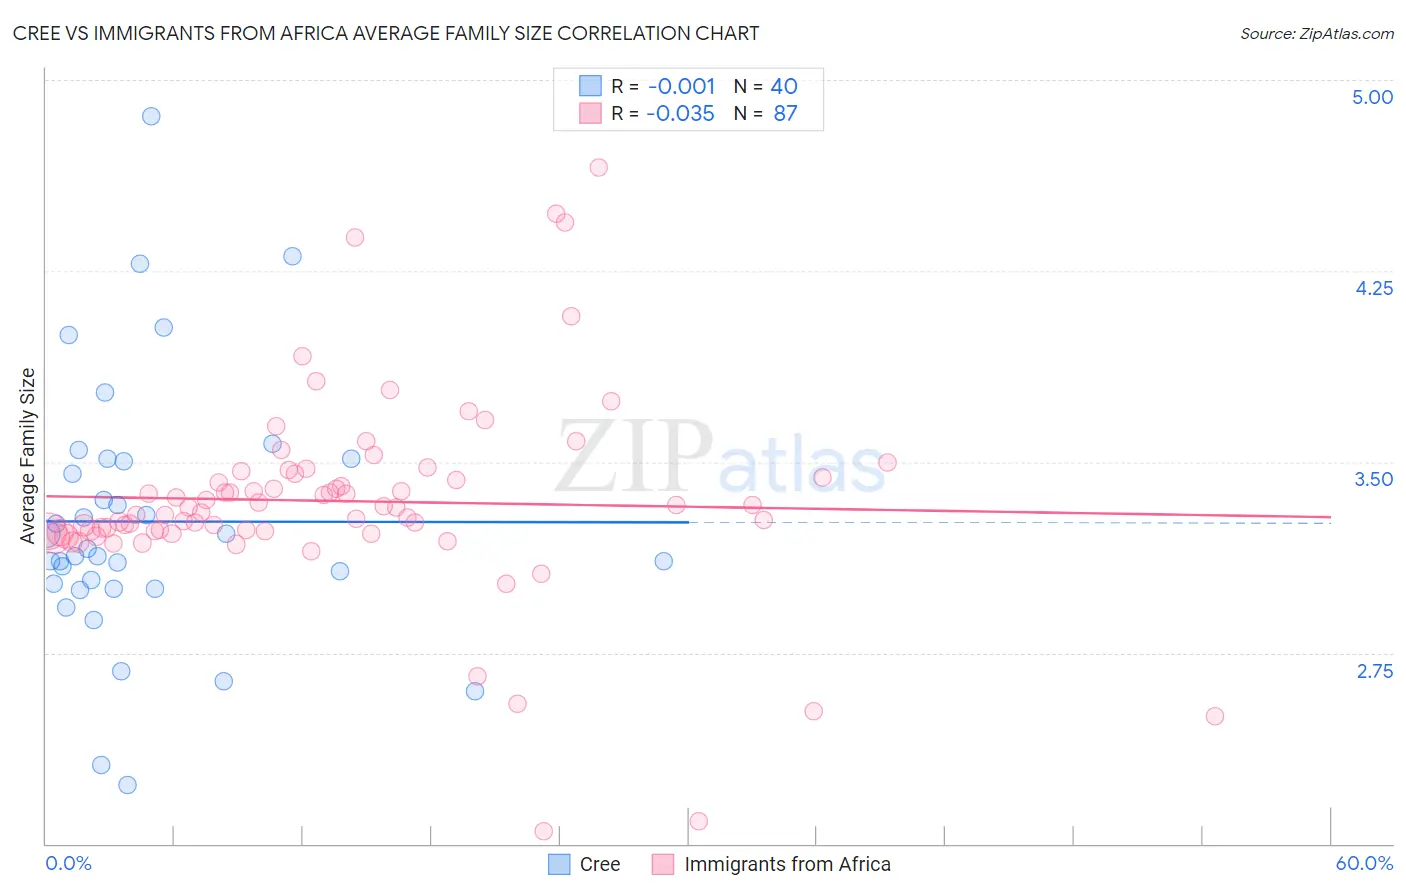 Cree vs Immigrants from Africa Average Family Size